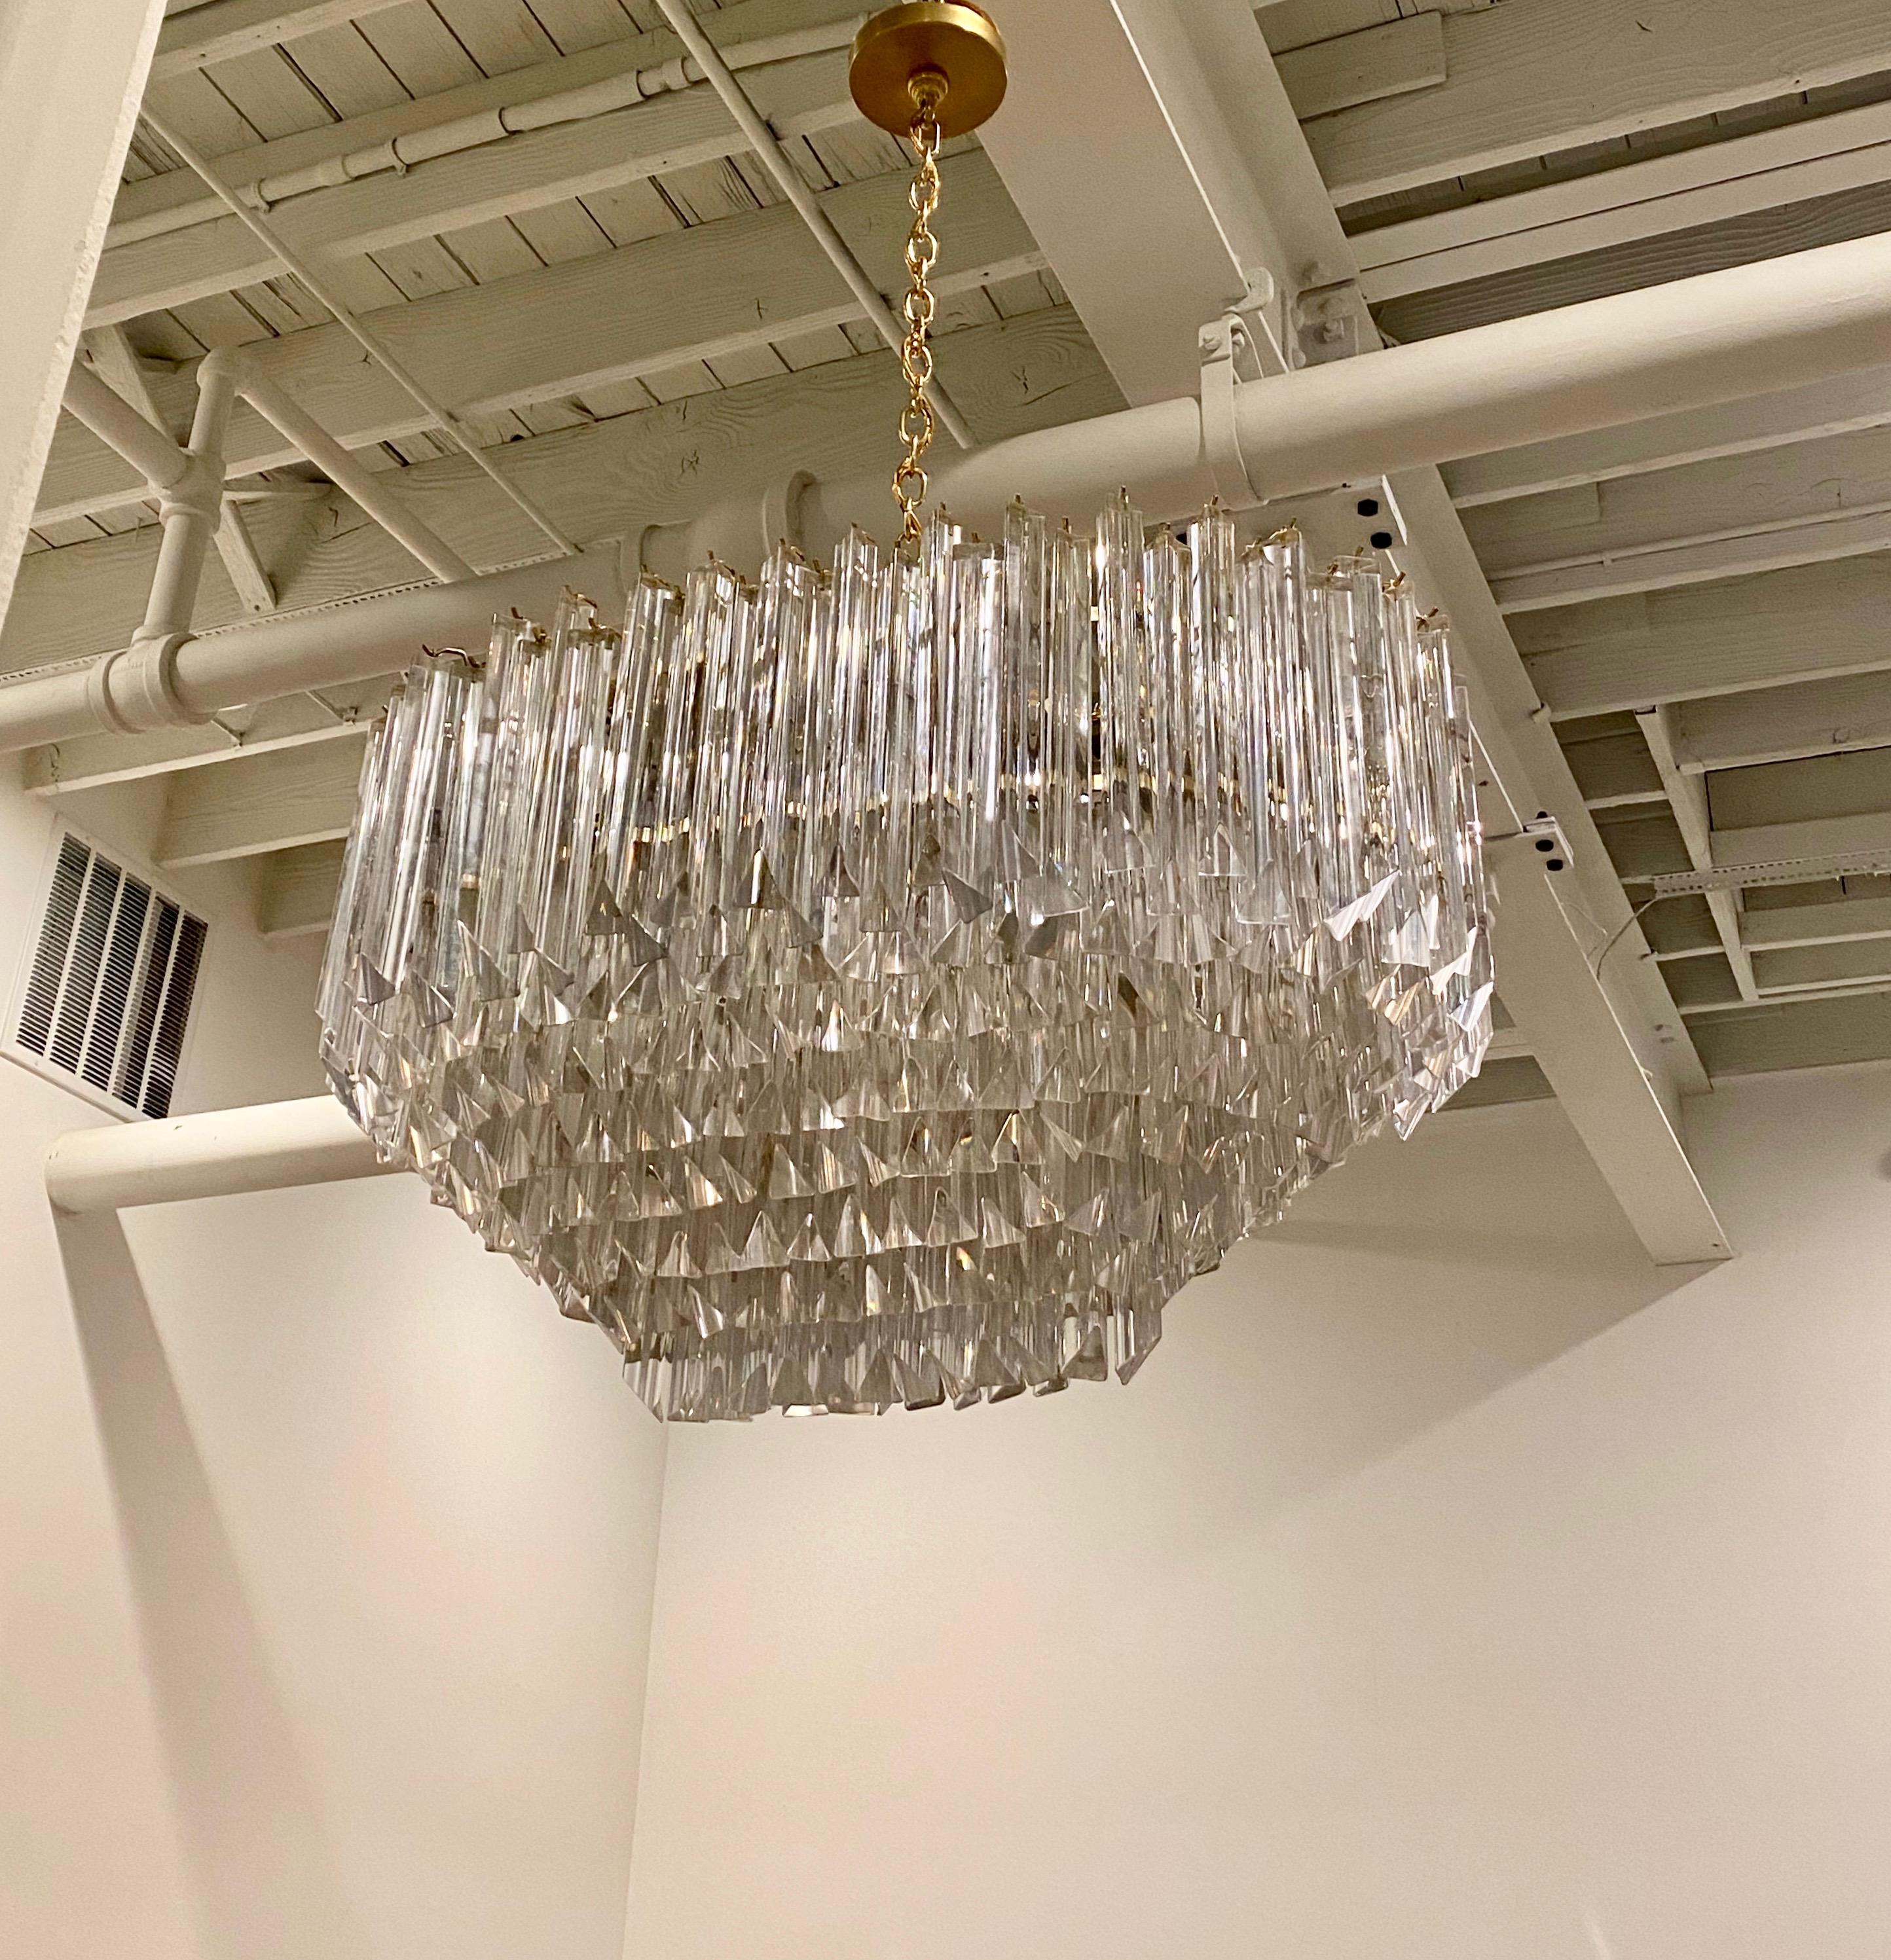 Mid-Century Modern Tiered Oval Chandelier In Excellent Condition For Sale In North Bergen, NJ